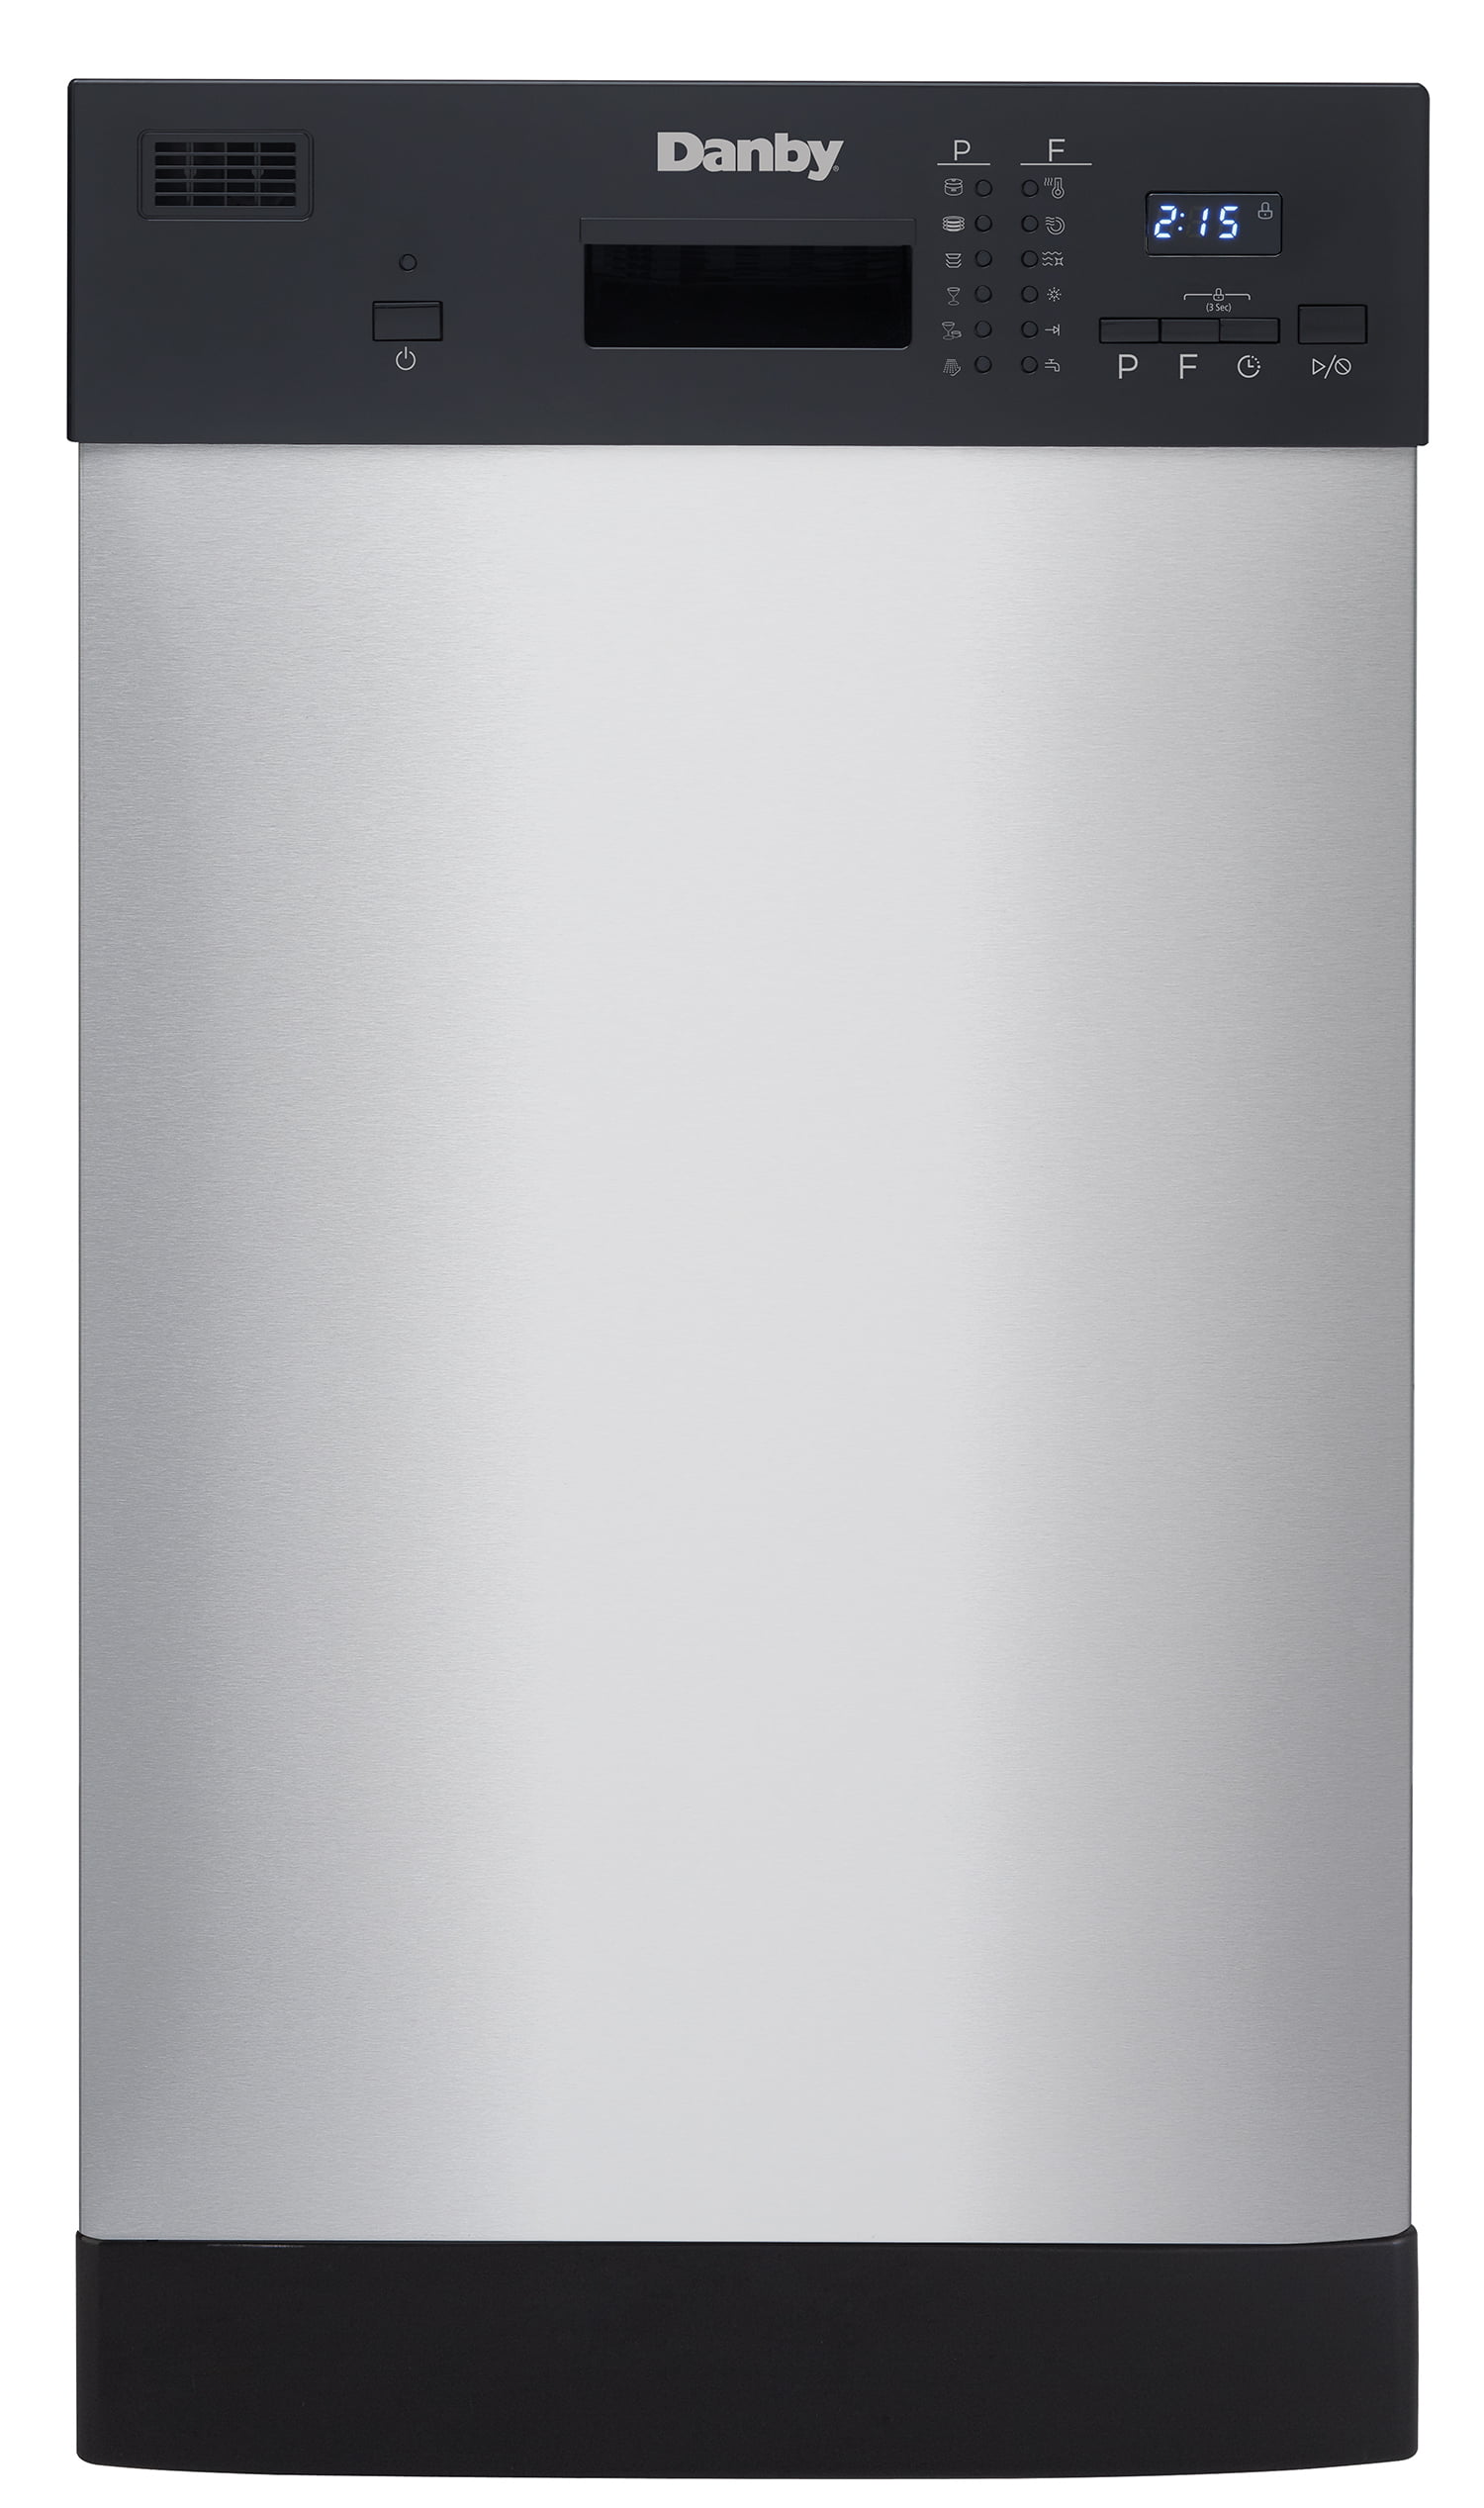 Danby 18" Built-In Dishwasher in Stainless Steel